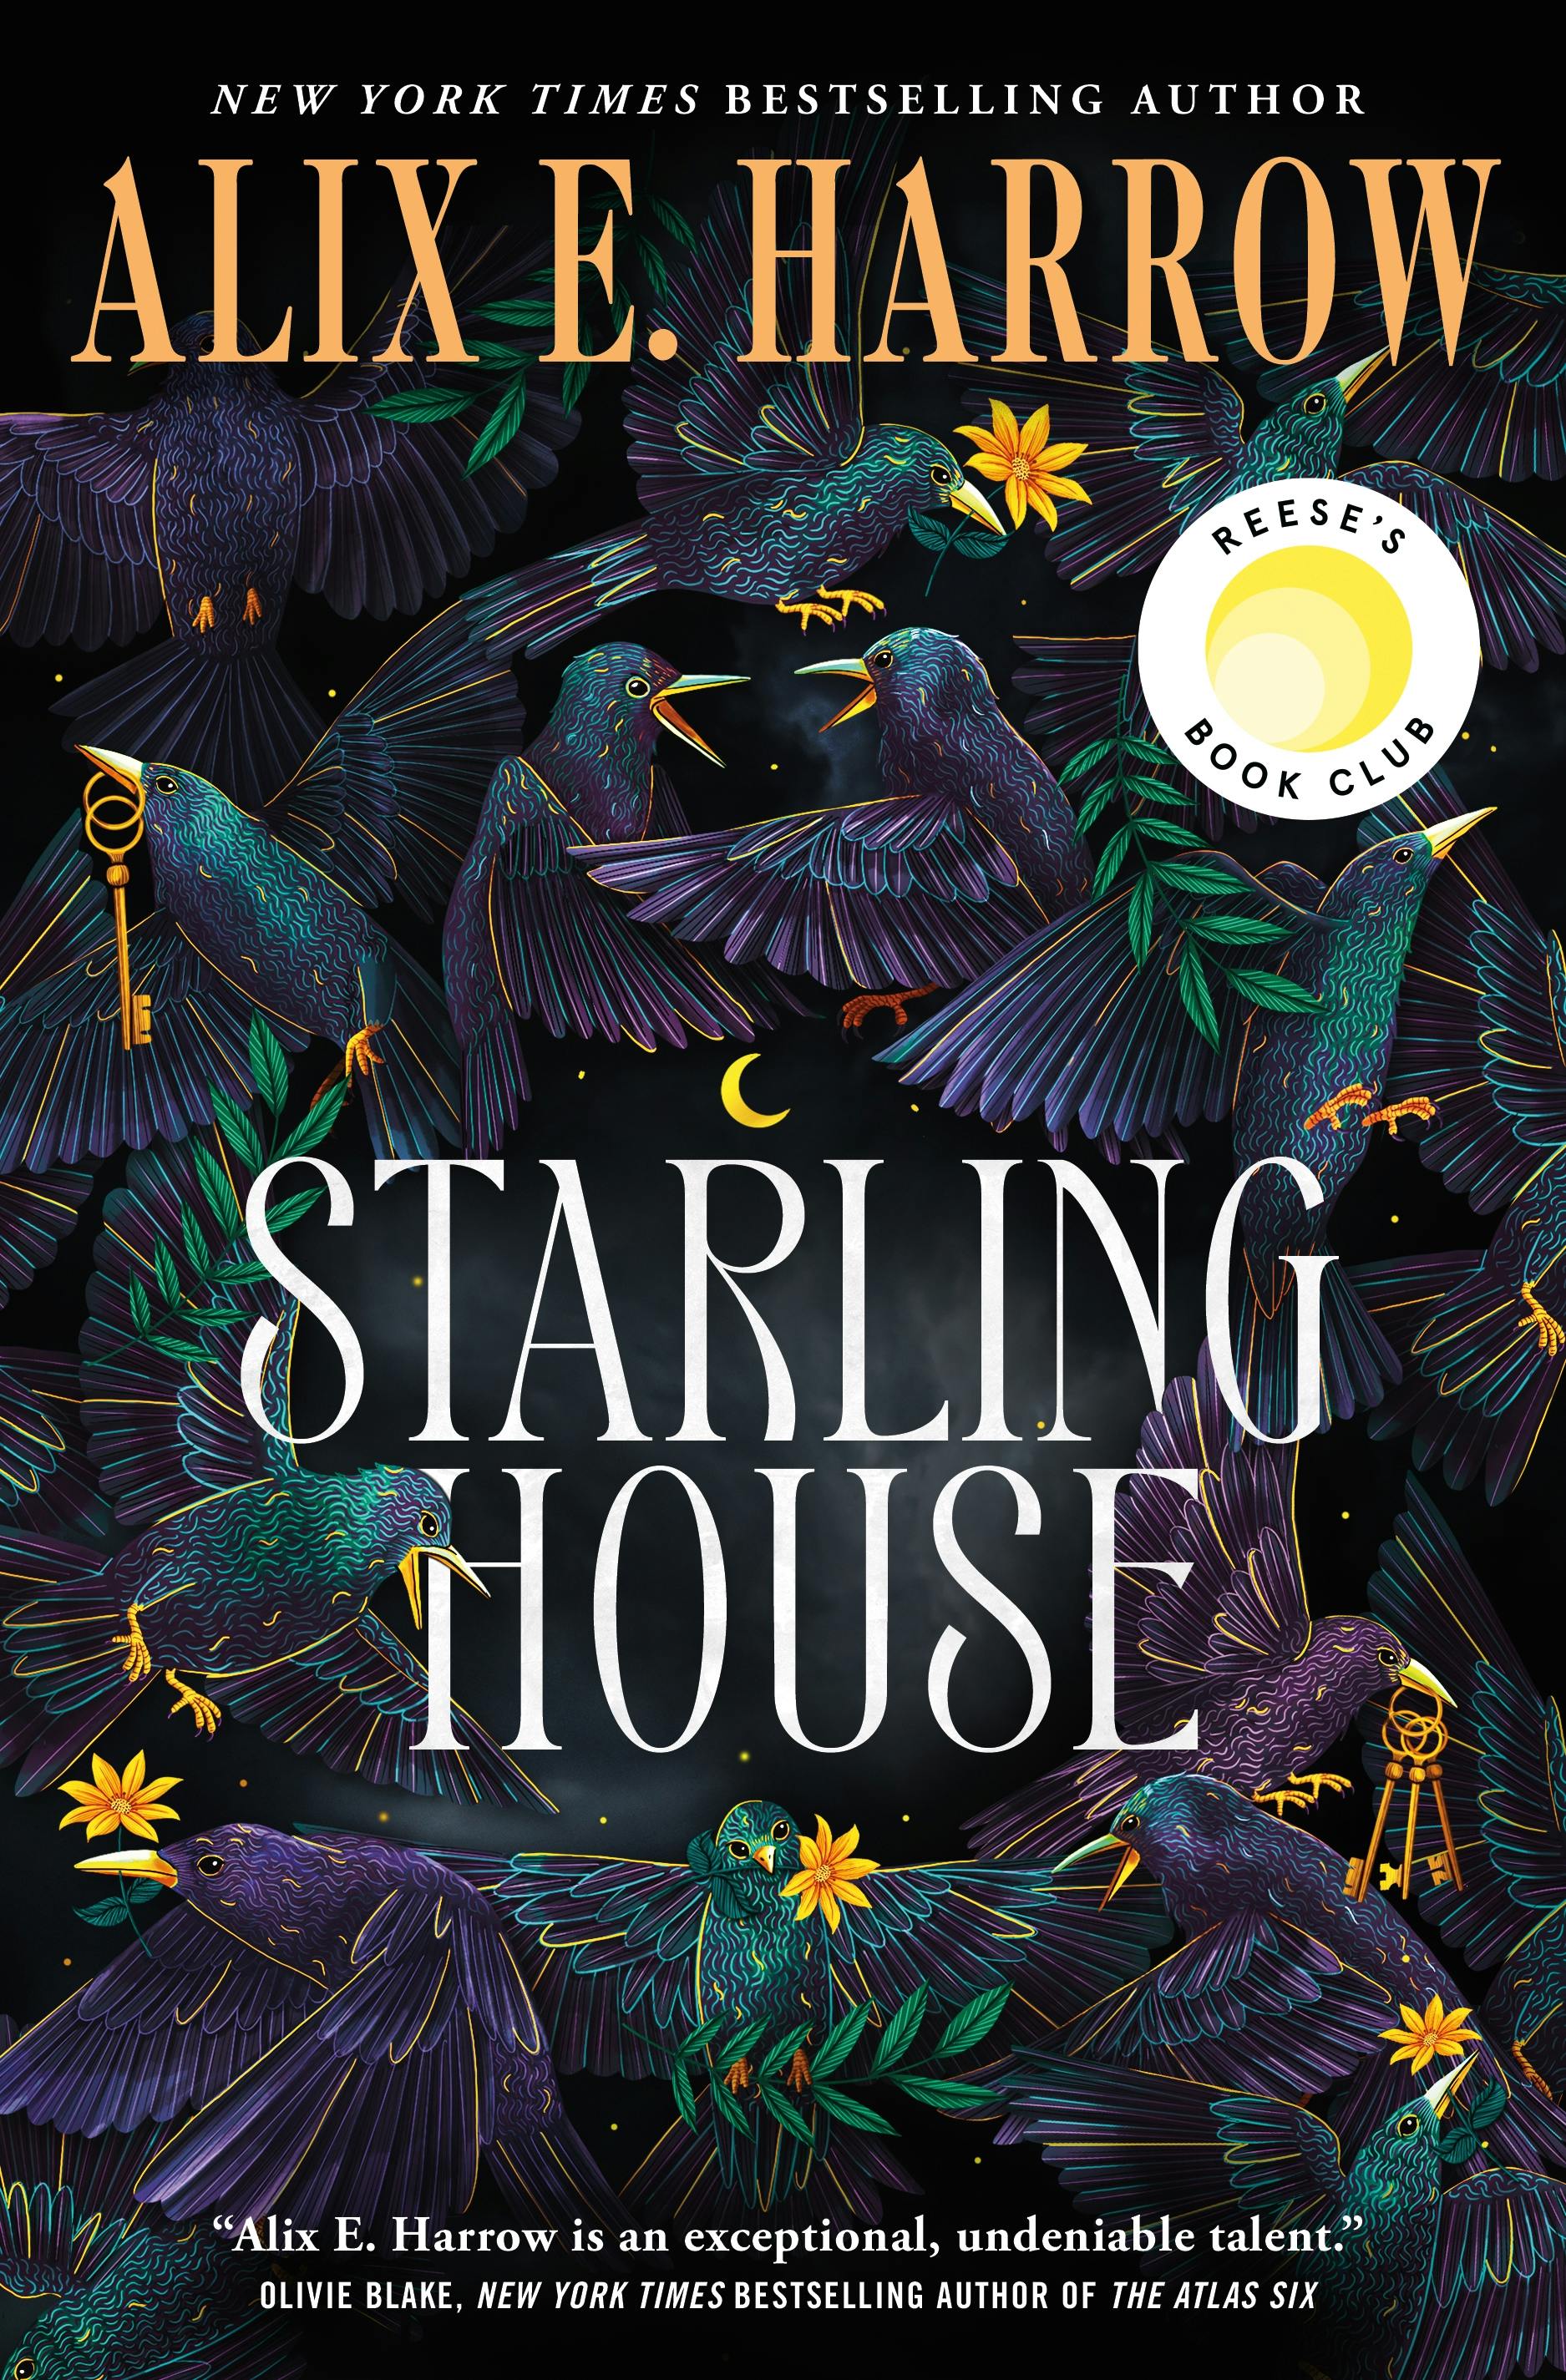 Cover for the book titled as: Starling House